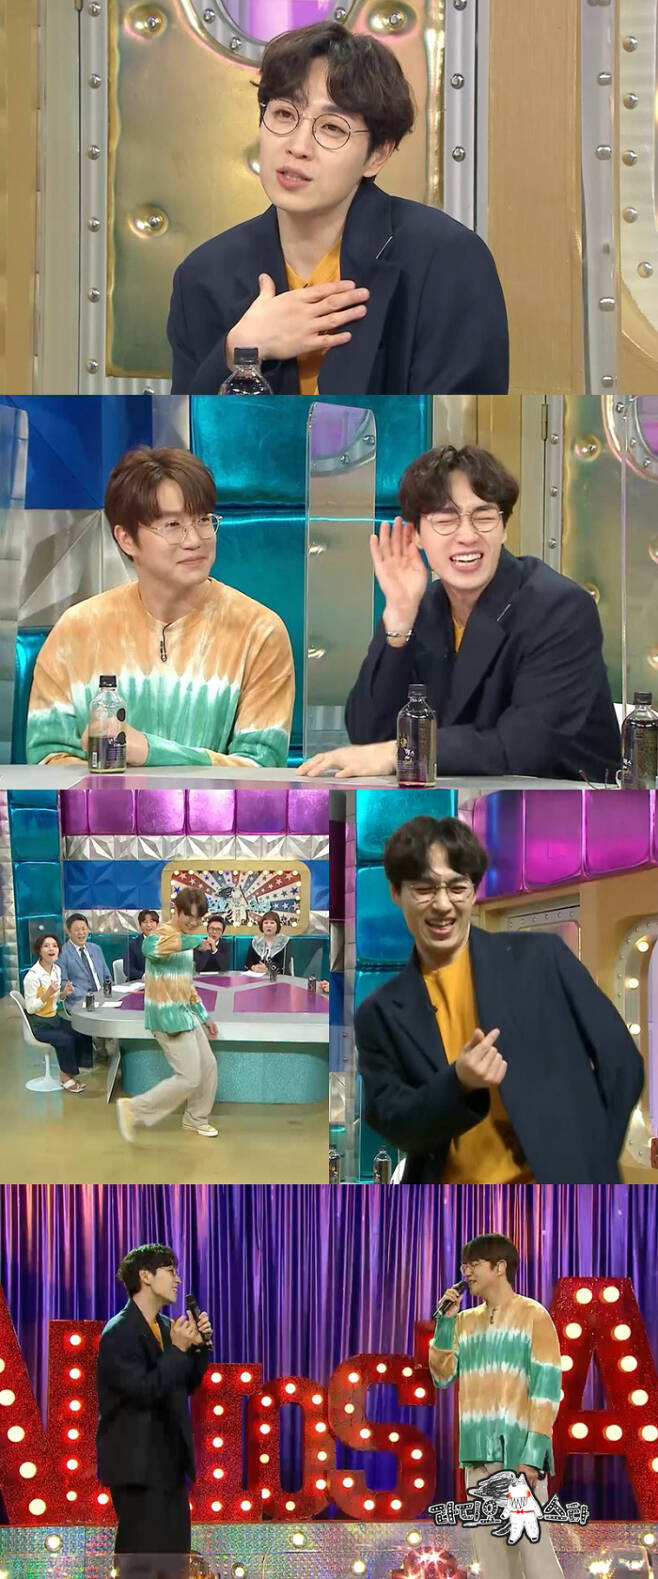 SG Wannabe Lee Seok Hoon appears on Radio Star, causing curiosity by revealing an anecdote that Wilhelm screen was written on the phone of Sung Si-kyung, a wife who is a Sung Si-kyung Super real fan.MBC Radio Star (planned by Kang Young-sun/director Kang Sung-ah), which is scheduled to air on the 26th (Wednesday), is featured with four people, Lee Geum-hee, Sung Si-kyung, Lee Seok Hoon, and Tsubok Man (Sungwoo Kim Bo-min), who received the eardrums of the whole nation with a heart-warming voice.Honey Voice Legend Sung Si-kyung and the hottest emotional Balader Lee Seok Hoon these days boast a ballad-like senior chemistry.Lee Seok Hoon says, The most respected singer is Sung Si-kyung. Even though he reveals his affection for his seniors, he draws a line saying I respect it as Asian limited and makes Sung Si-kyung wince and laugh.Lee Seok Hoon said that his closest aide is also a Super real fan of Sung Si-kyung. Every time I saw Sung Si-kyungs SNS, a familiar ID has already pressed Like.It was my wife. In the meantime, I also released an anecdote that I sang Sung Si-kyungs song and bought my heart even when I first met my wife.From the first meeting to preaching and childcare, Sung Si-kyung has always been with his wife in the love story, making Sung Si-kyung happy.However, Lee Seok Hoon said, I am married, but I am a winner. He added a word of conversion to his senior Sung Si-kyung, saying that he had a one defeat of doubt.Lee Seok Hoon, a junior singer, is expected to see Sung Si-kyungs marriage timing as he watched from his side, but he throws a word that makes Sung Si-kyung sour.Meanwhile, Sung Si-kyung and Lee Seok Hoon explode the inherent dance instinct of the Dancing Shin Dance King and show off their emotional Balader dance personalities that are rarely seen.Sung Si-kyung, who recently released his eighth album, will present the point choreography of the title song I LOVE U.Jill Sera Lee Seok Hoon boasts a dance line recognized by Park Jin-young and presents a groove-filled Insa Dance to create a new scene called Dance Battle of Two Baladers.Sung Si-kyung and Lee Seok Hoon will also present their impressions by presenting Sung Si-kyungs representative song Two People, and presenting the stage of their two eardrum boyfriends Dulets.Special chemistry of Sung Si-kyung and Lee Seok Hoon, who are direct juniors of Ballard, can be found on Radio Star, which is broadcasted at 10:30 pm on the 26th (Wednesday).